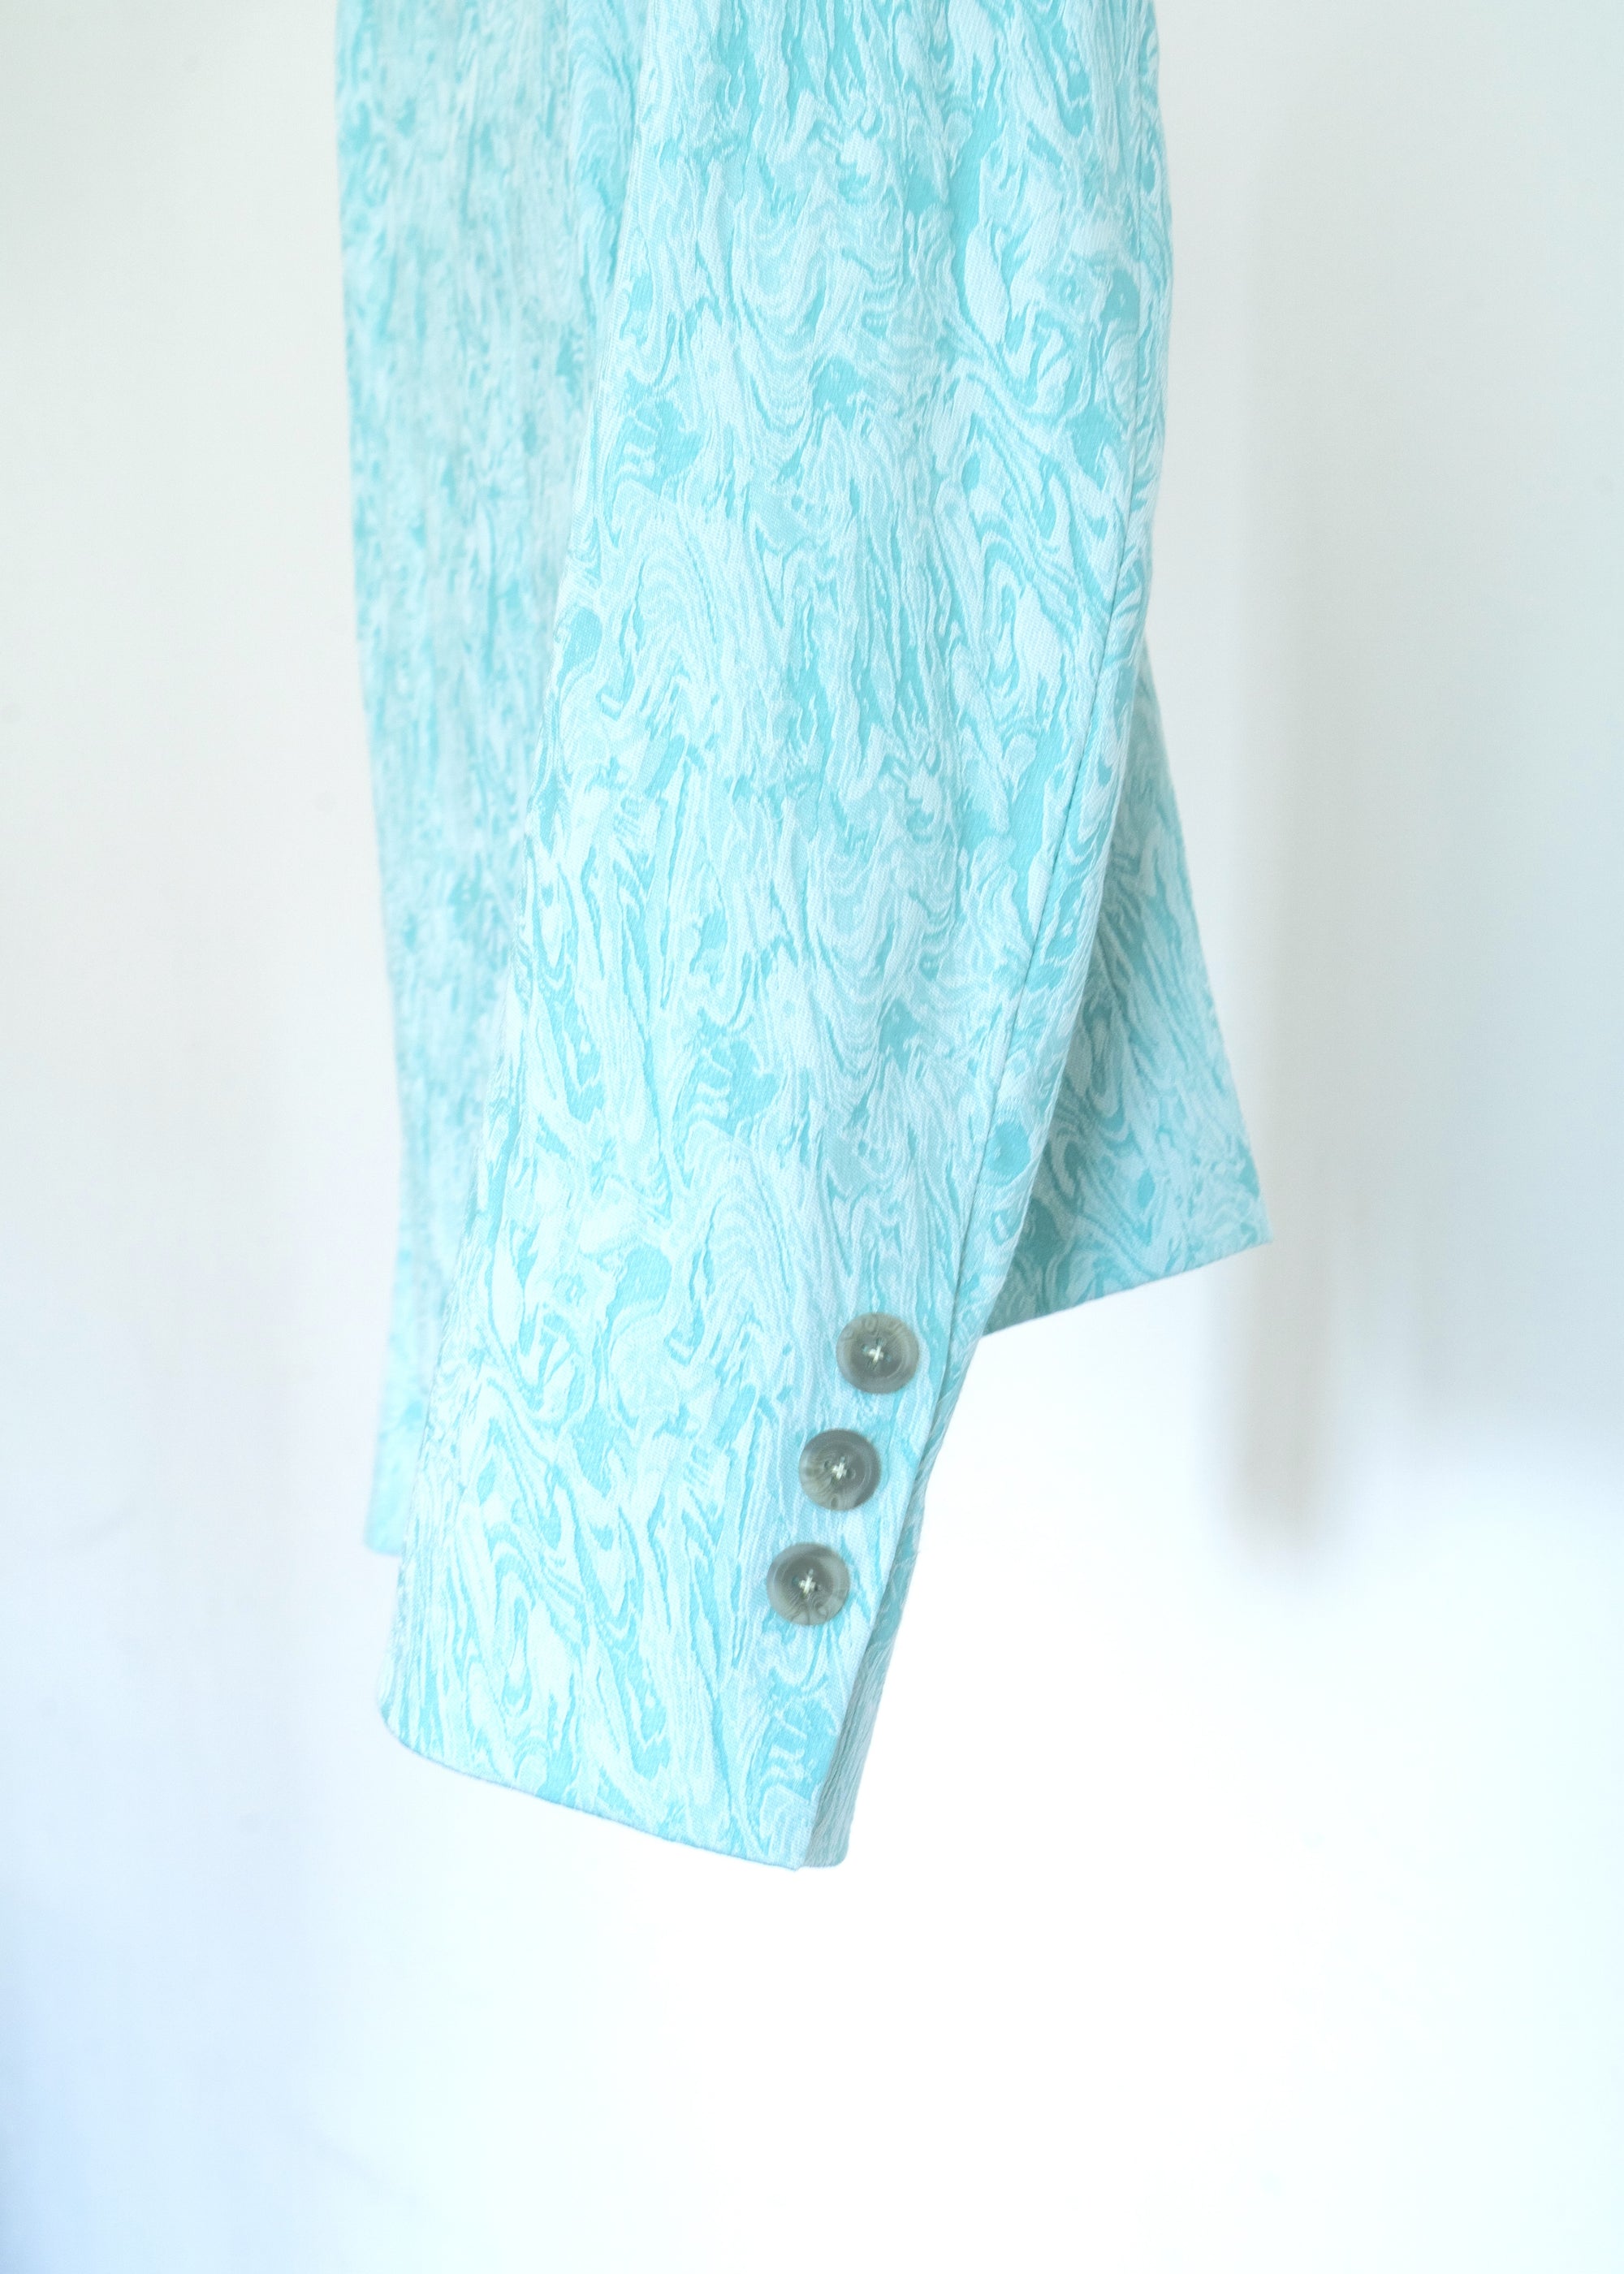 Misty teal marble boxy cropped jacket